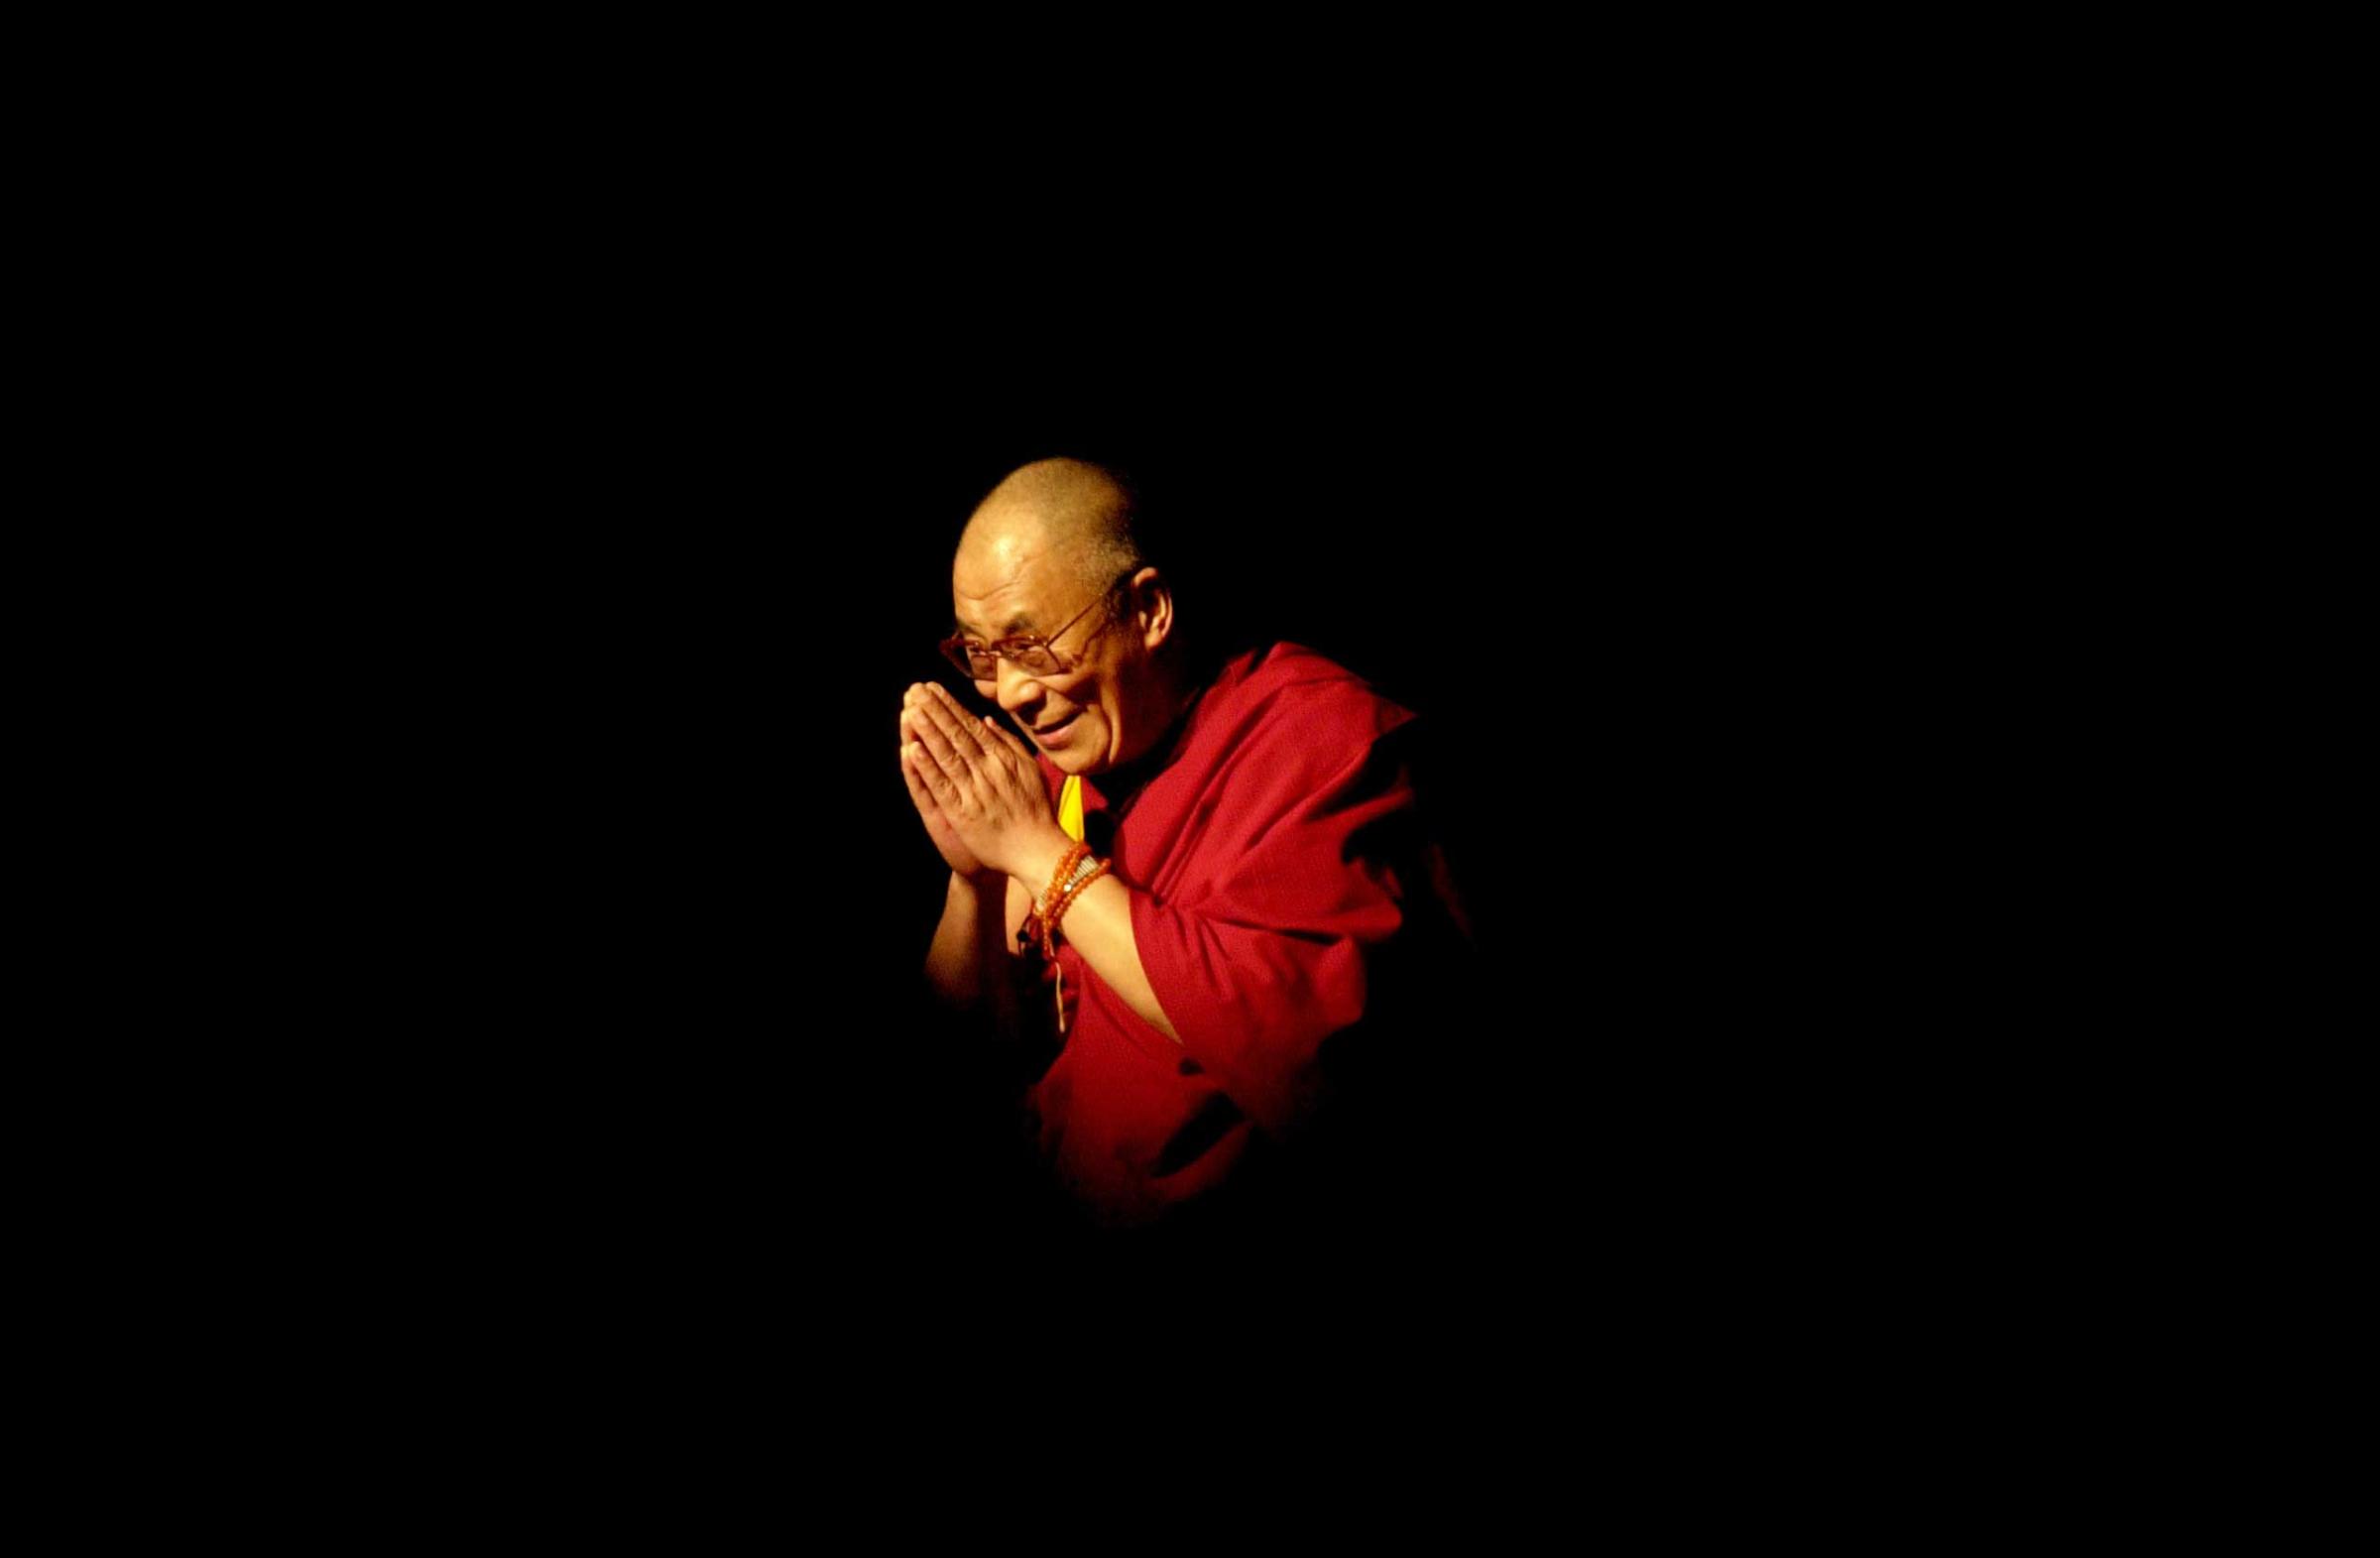 His Holiness the 14th Dalai Lama, appears at the University of California Los Angeles to give a public teaching in Los Angeles, May 2001.